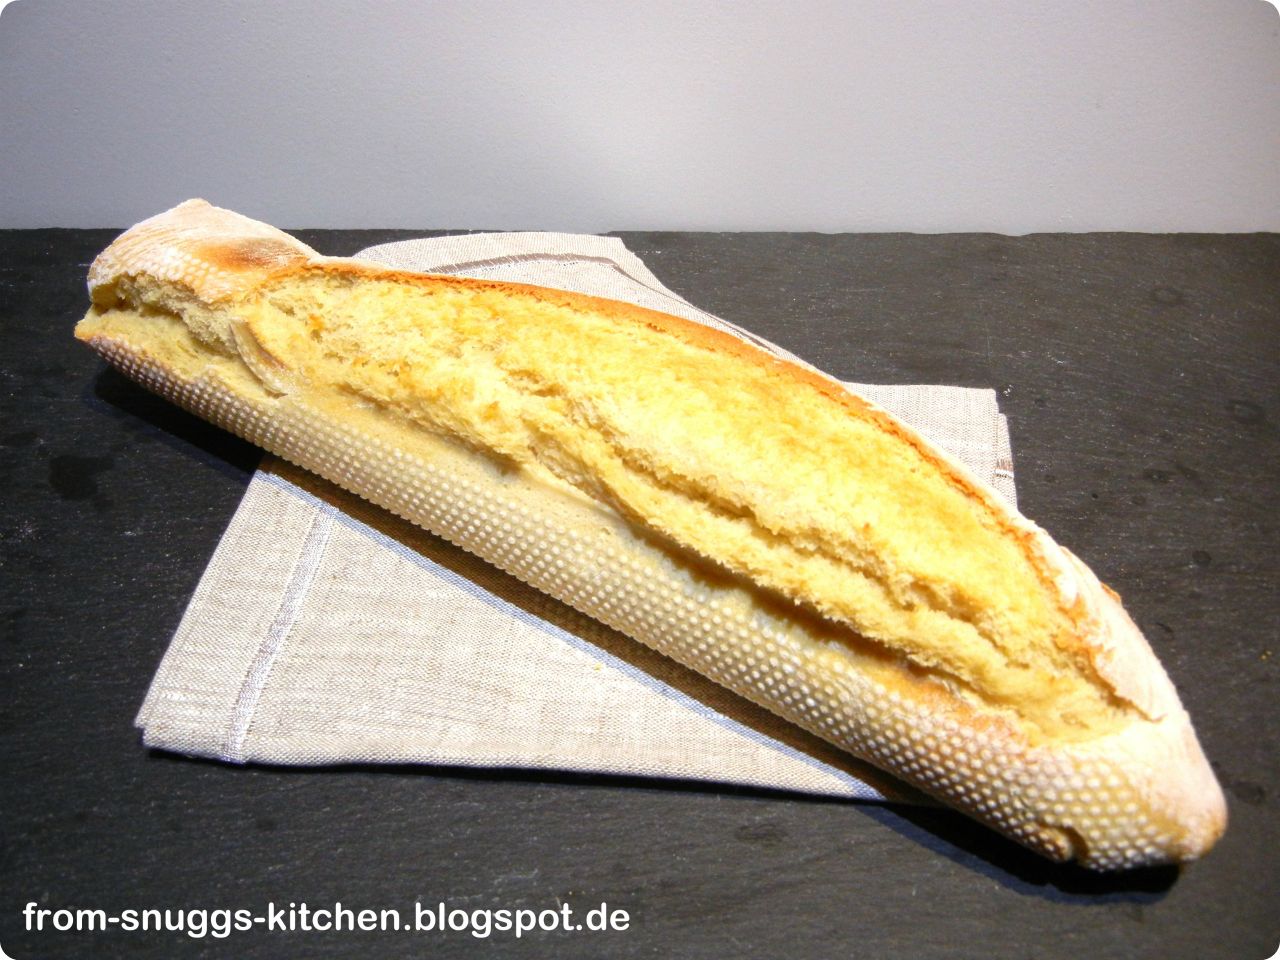 Turbo-Baguette - From-Snuggs-Kitchen